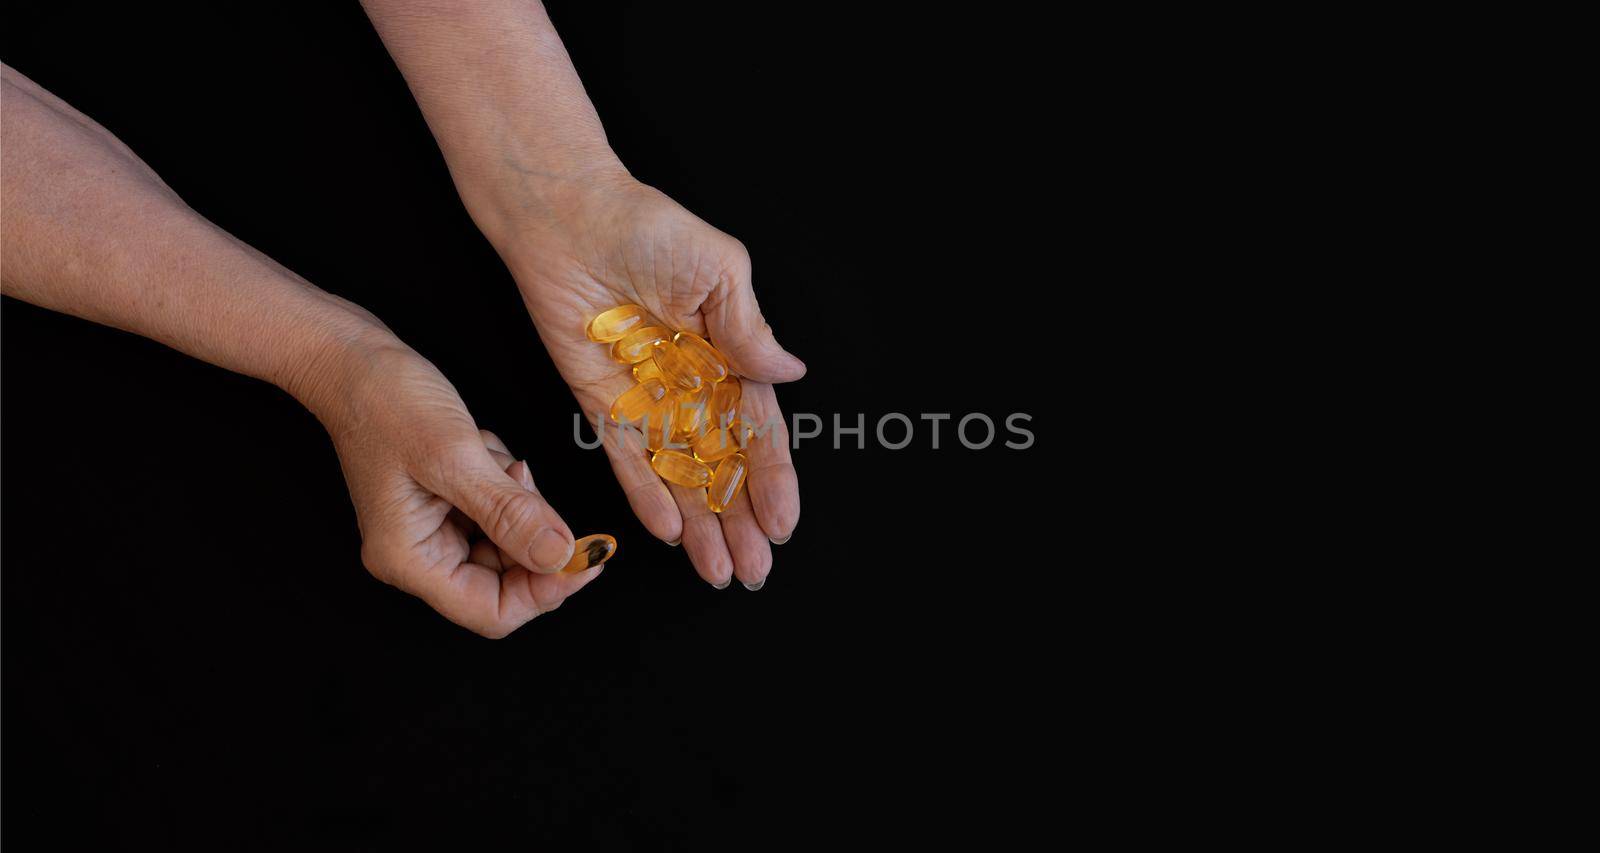 In the hands of an elderly woman, yellow pills. Close-up on a black background by Ramanouskaya